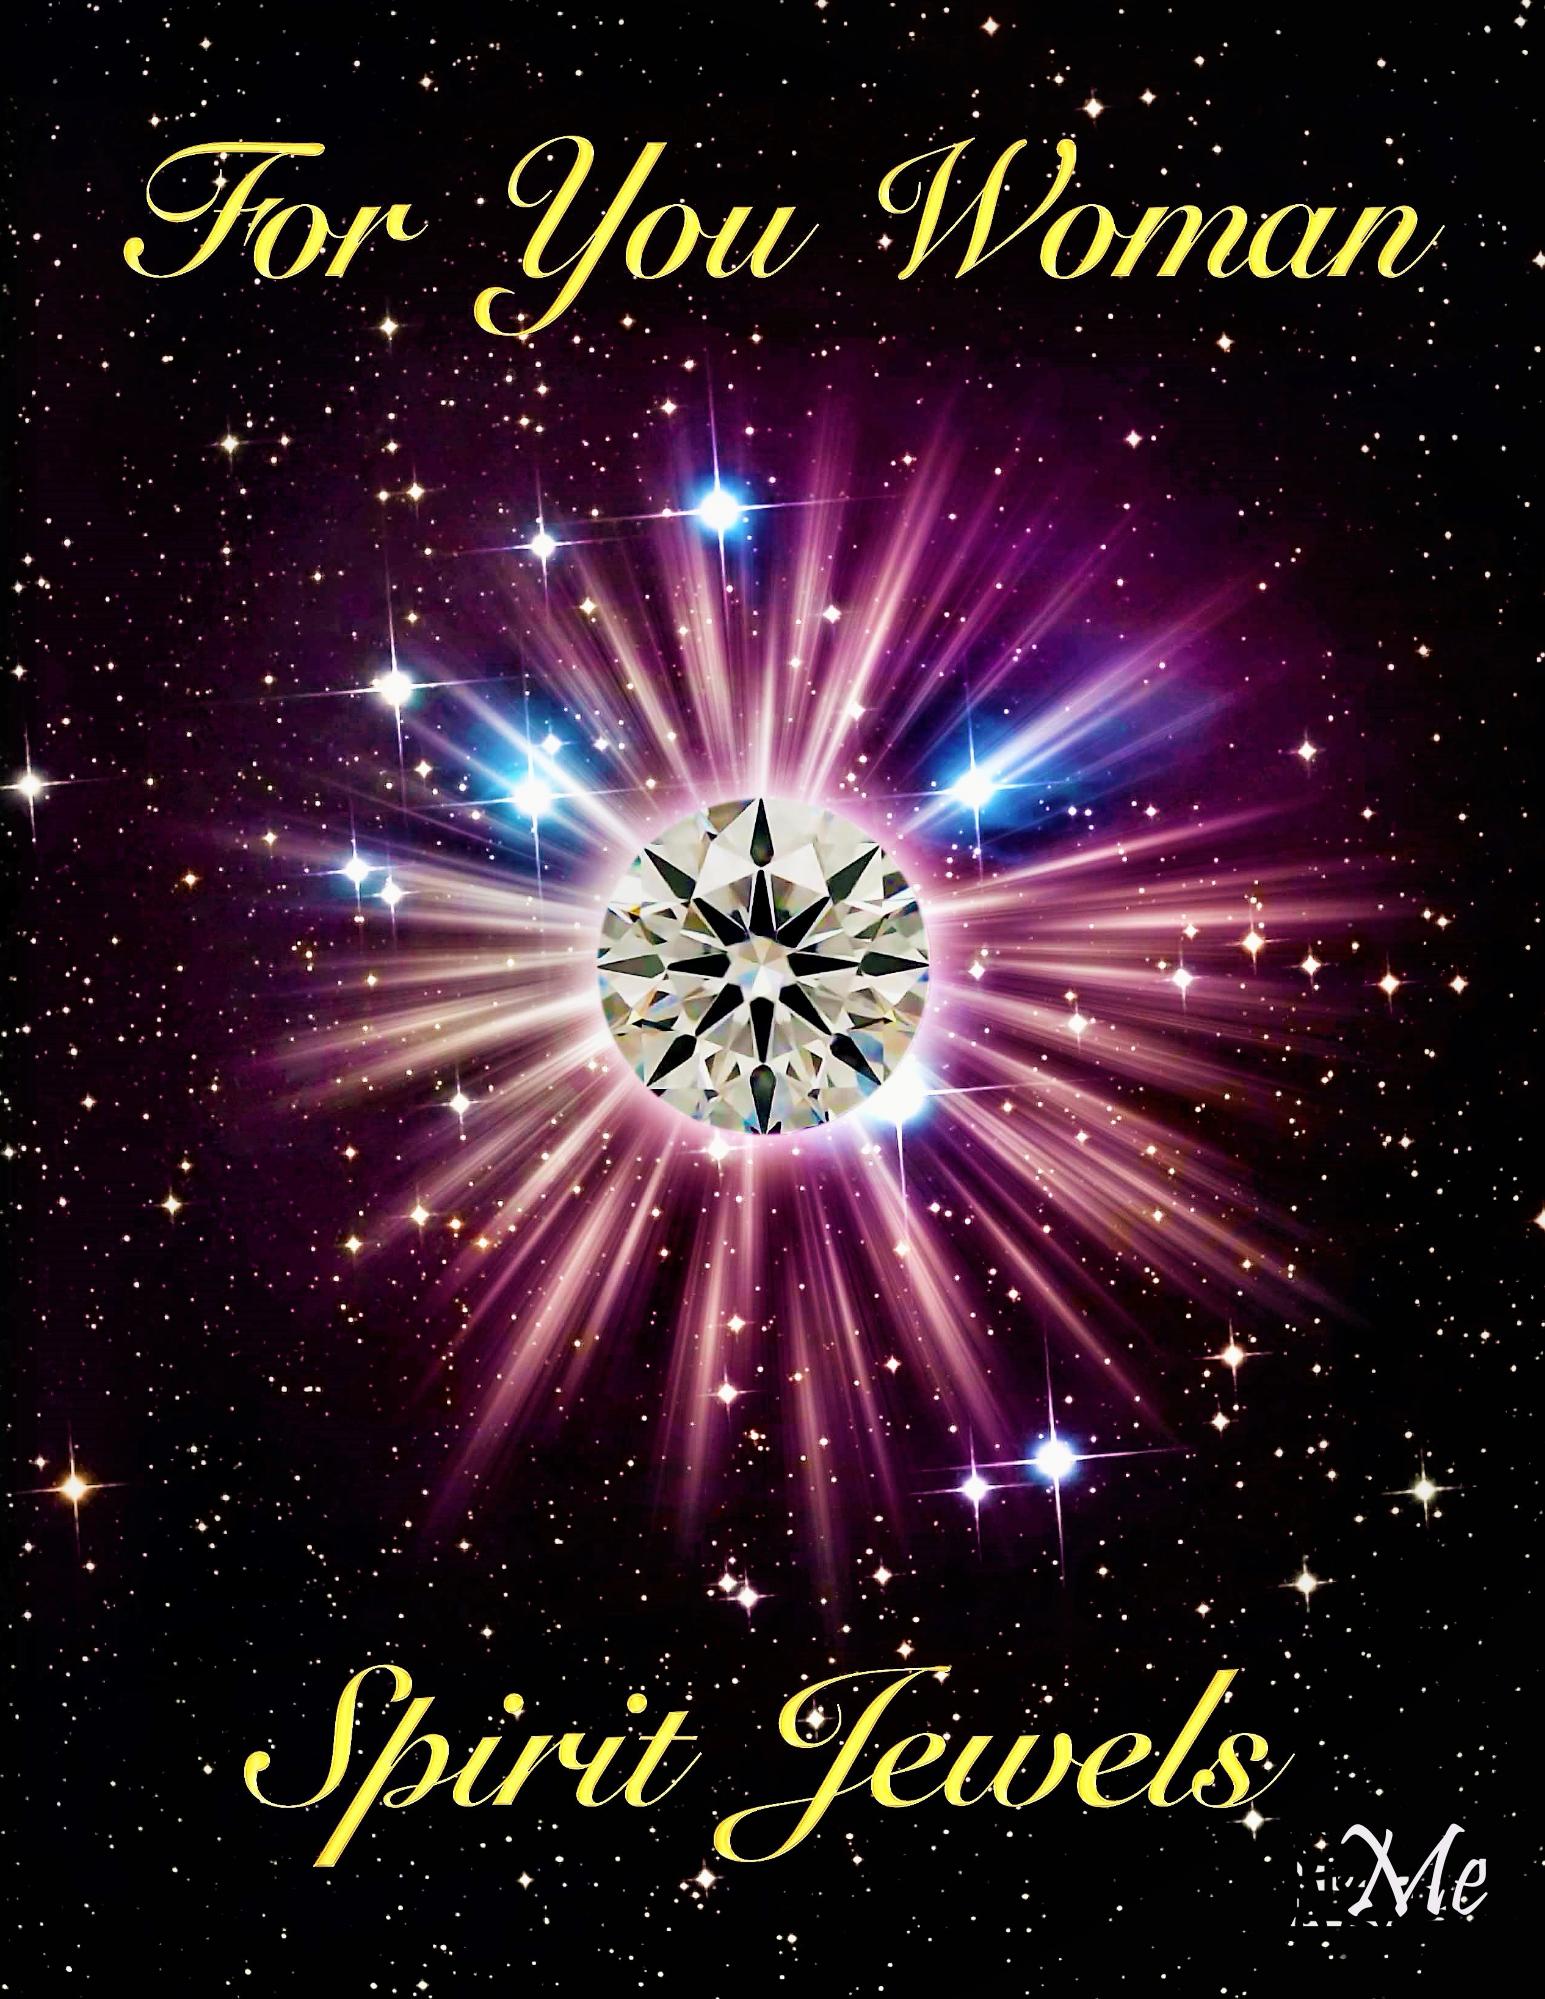 FOR_YOU_WOMAN_Spiri_Cover_for_Kindle